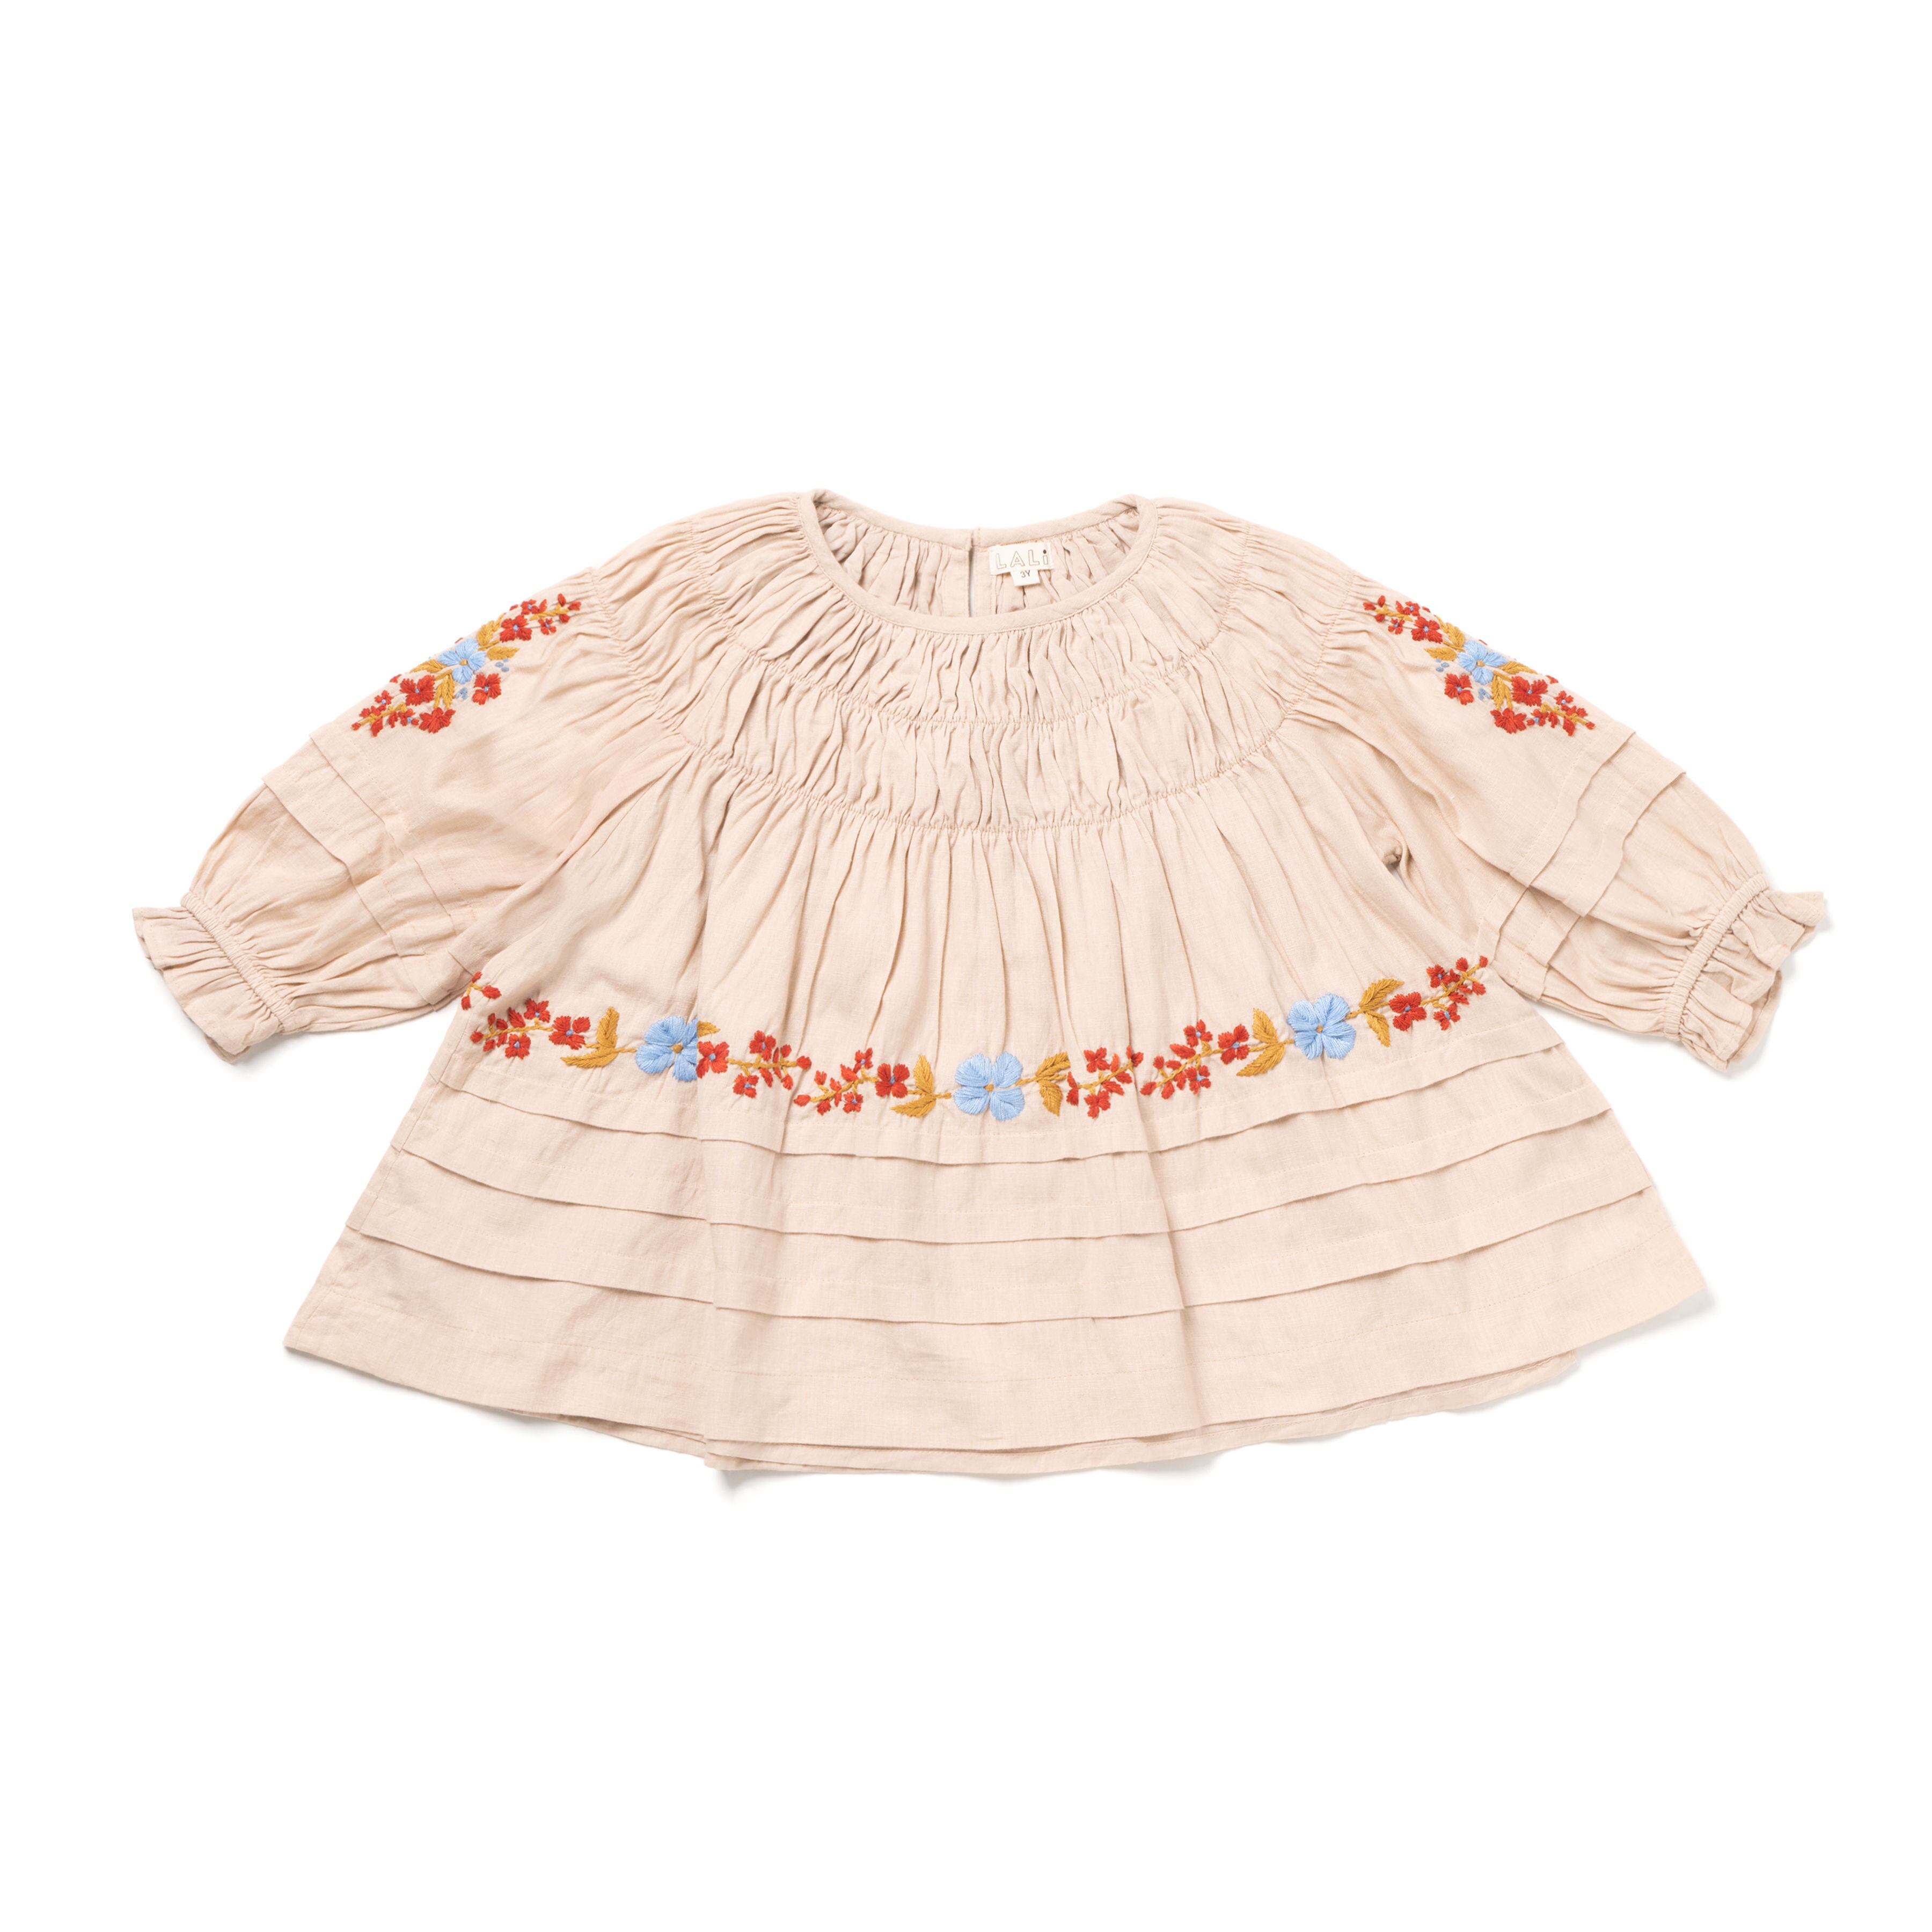 Lali/ Tulip Dress-Moonlight Embroidery | Treize powered by BASE